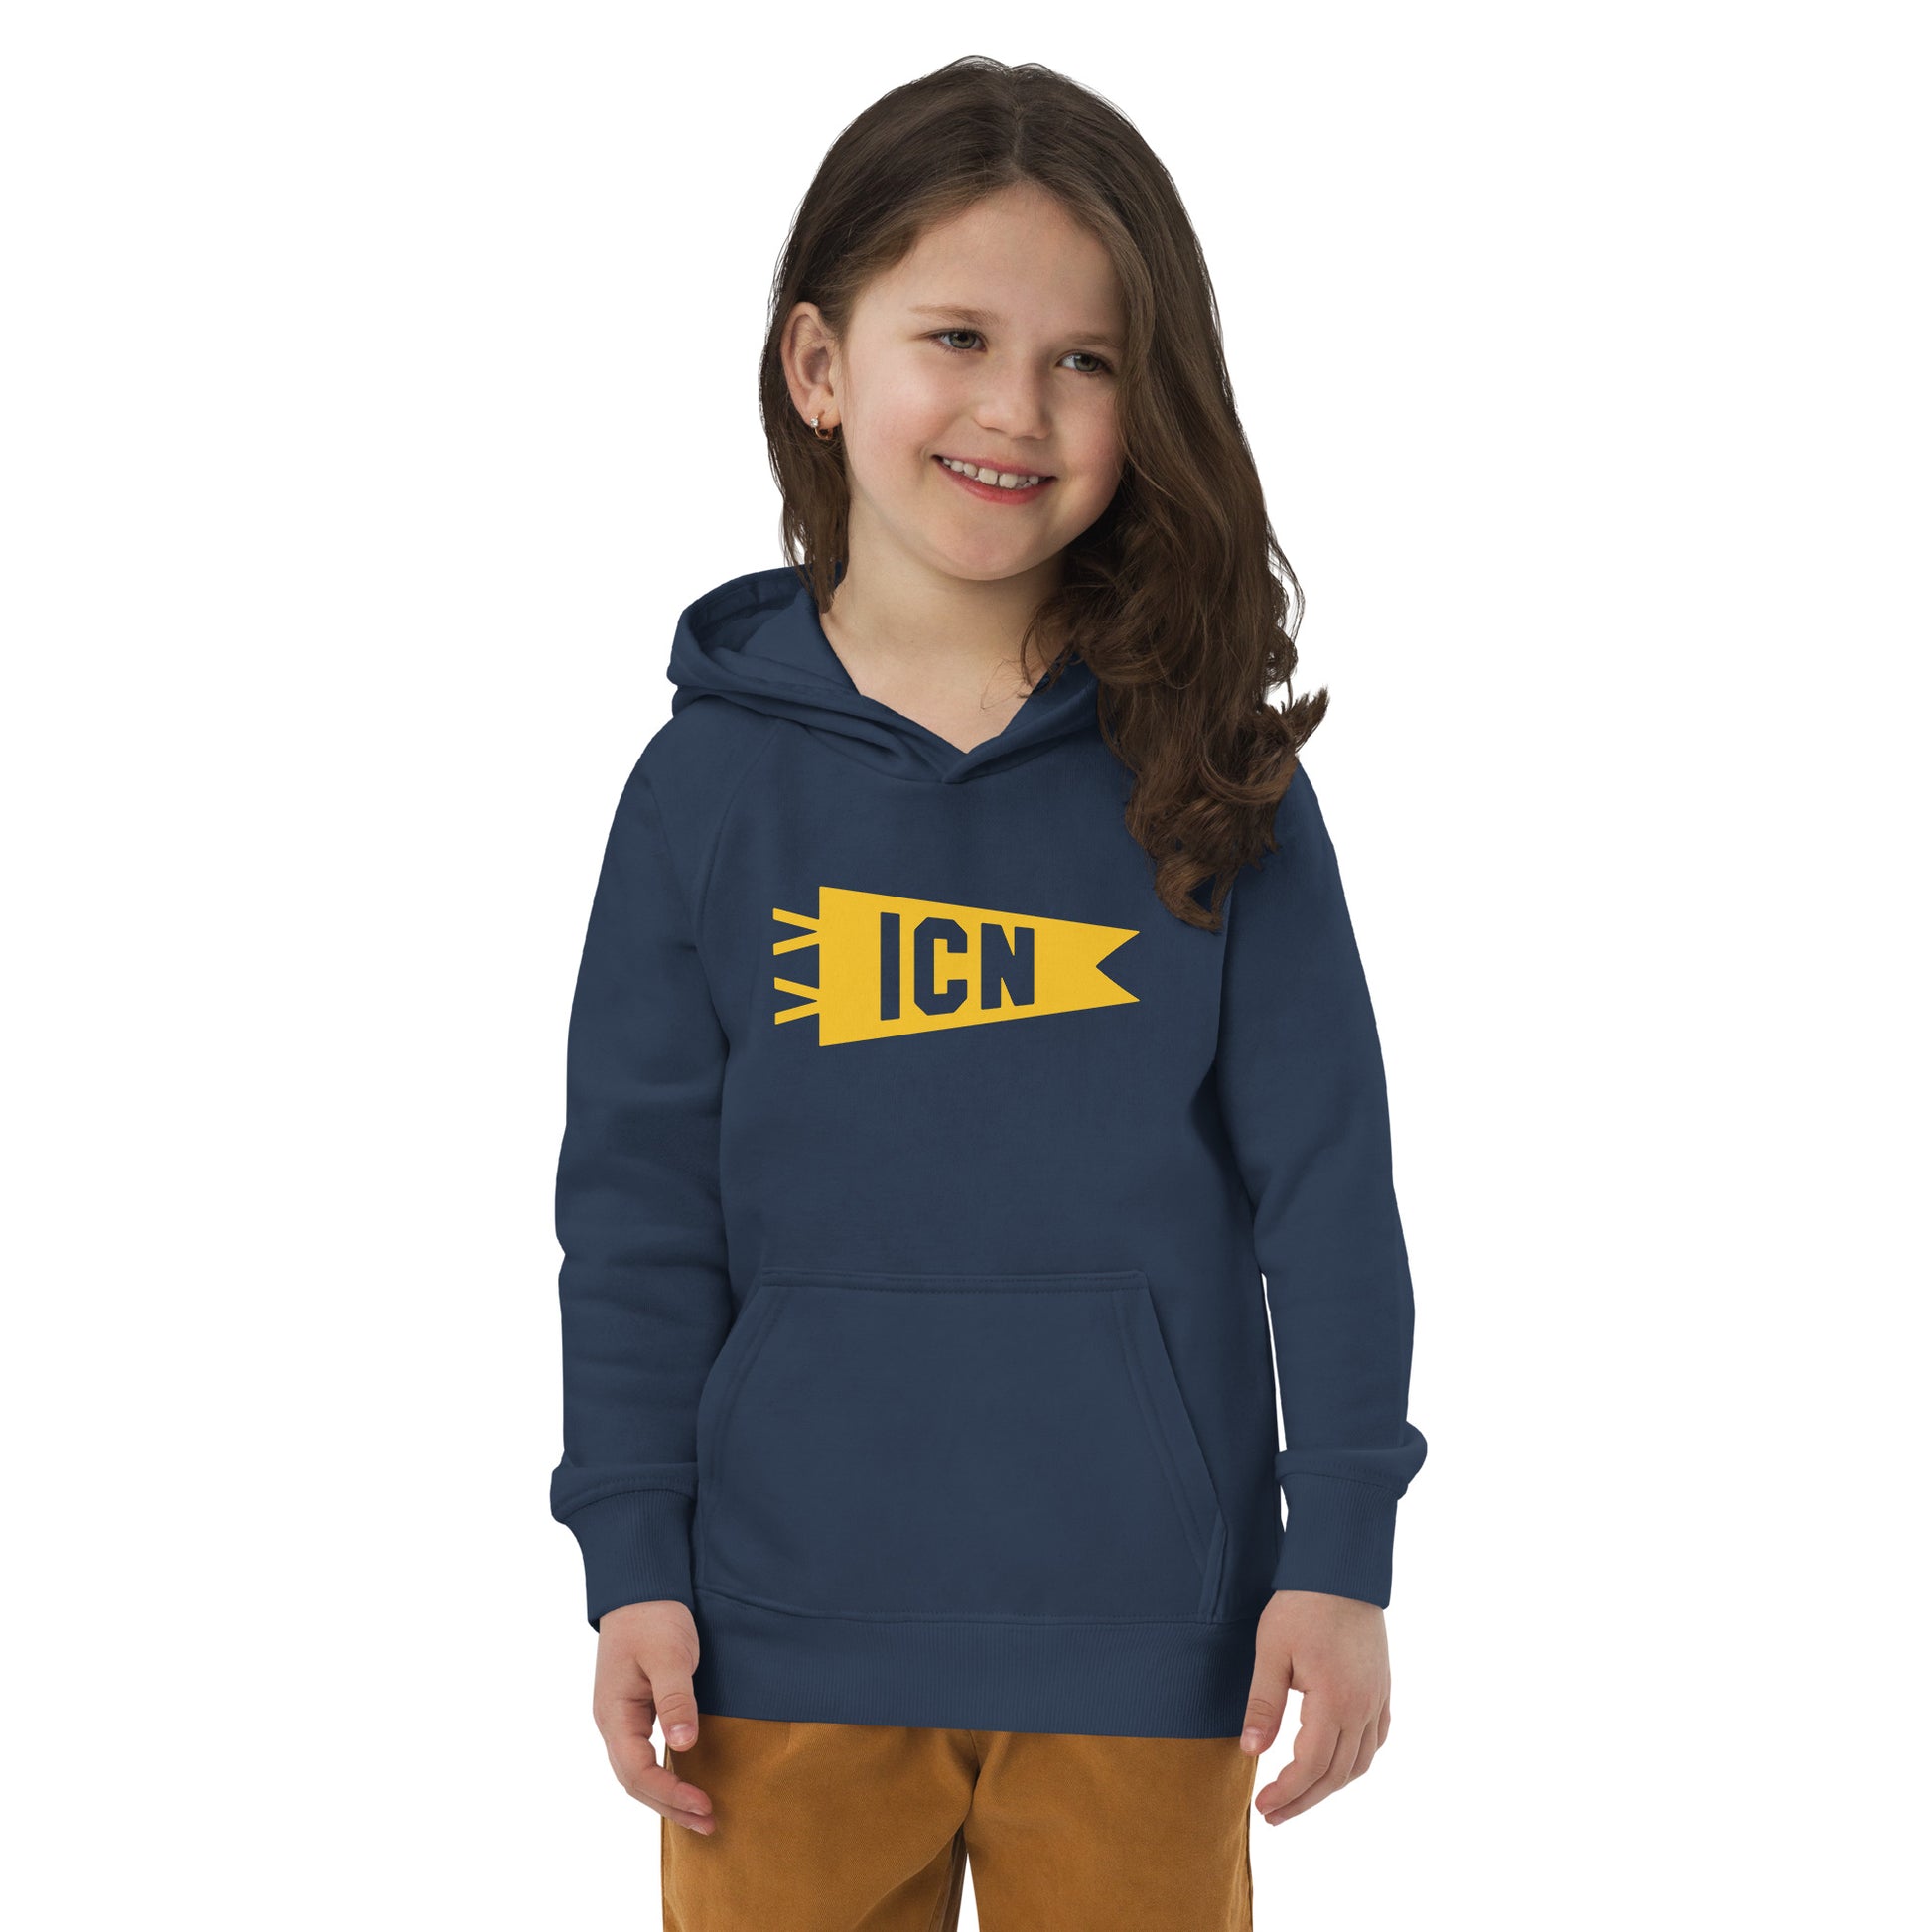 Kid's Sustainable Hoodie - Yellow Graphic • ICN Seoul • YHM Designs - Image 07